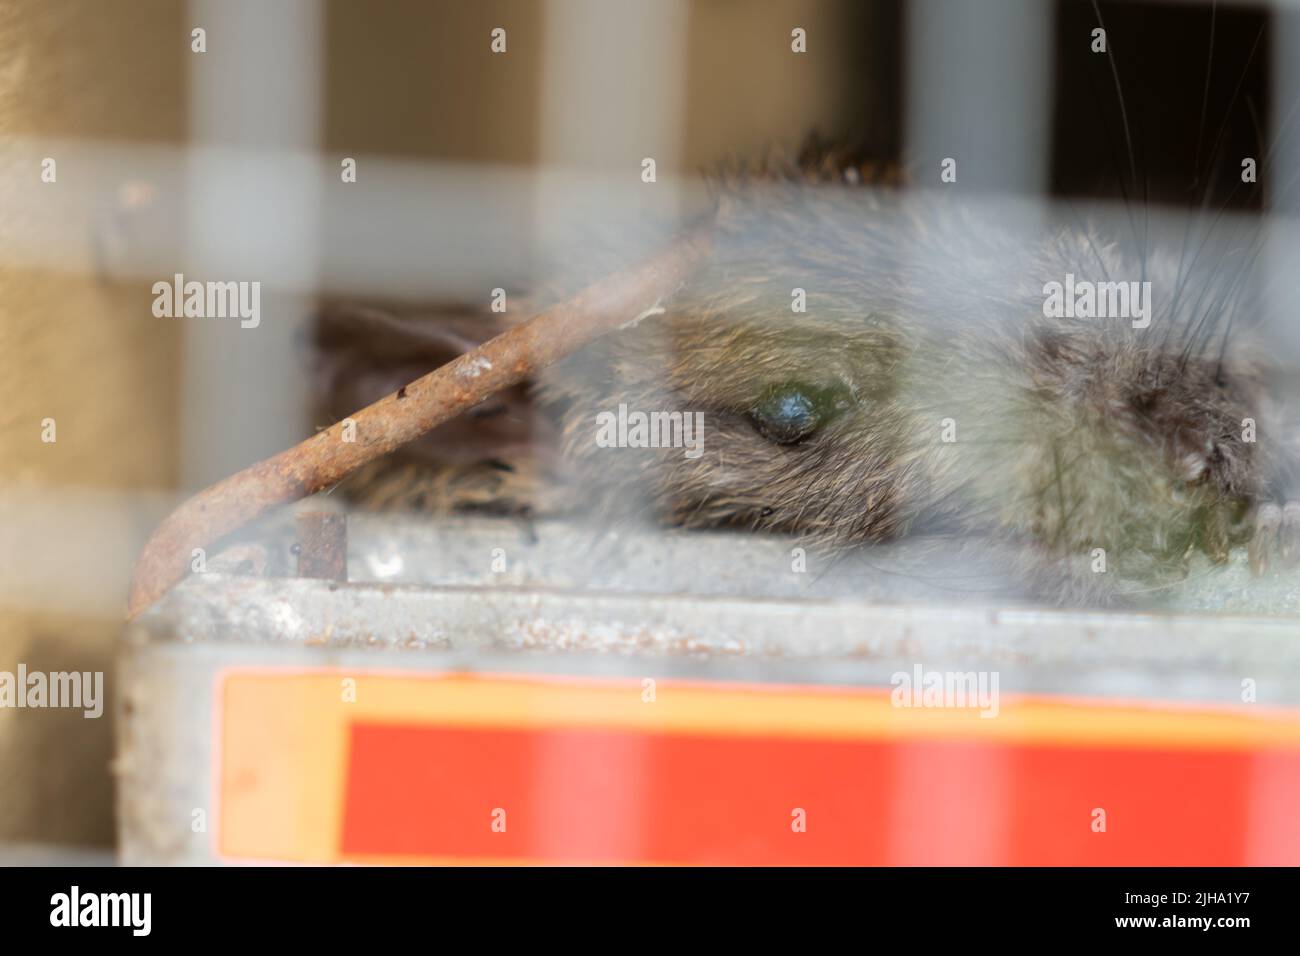 Caught and killed, pest through mesh in trap Stock Photo